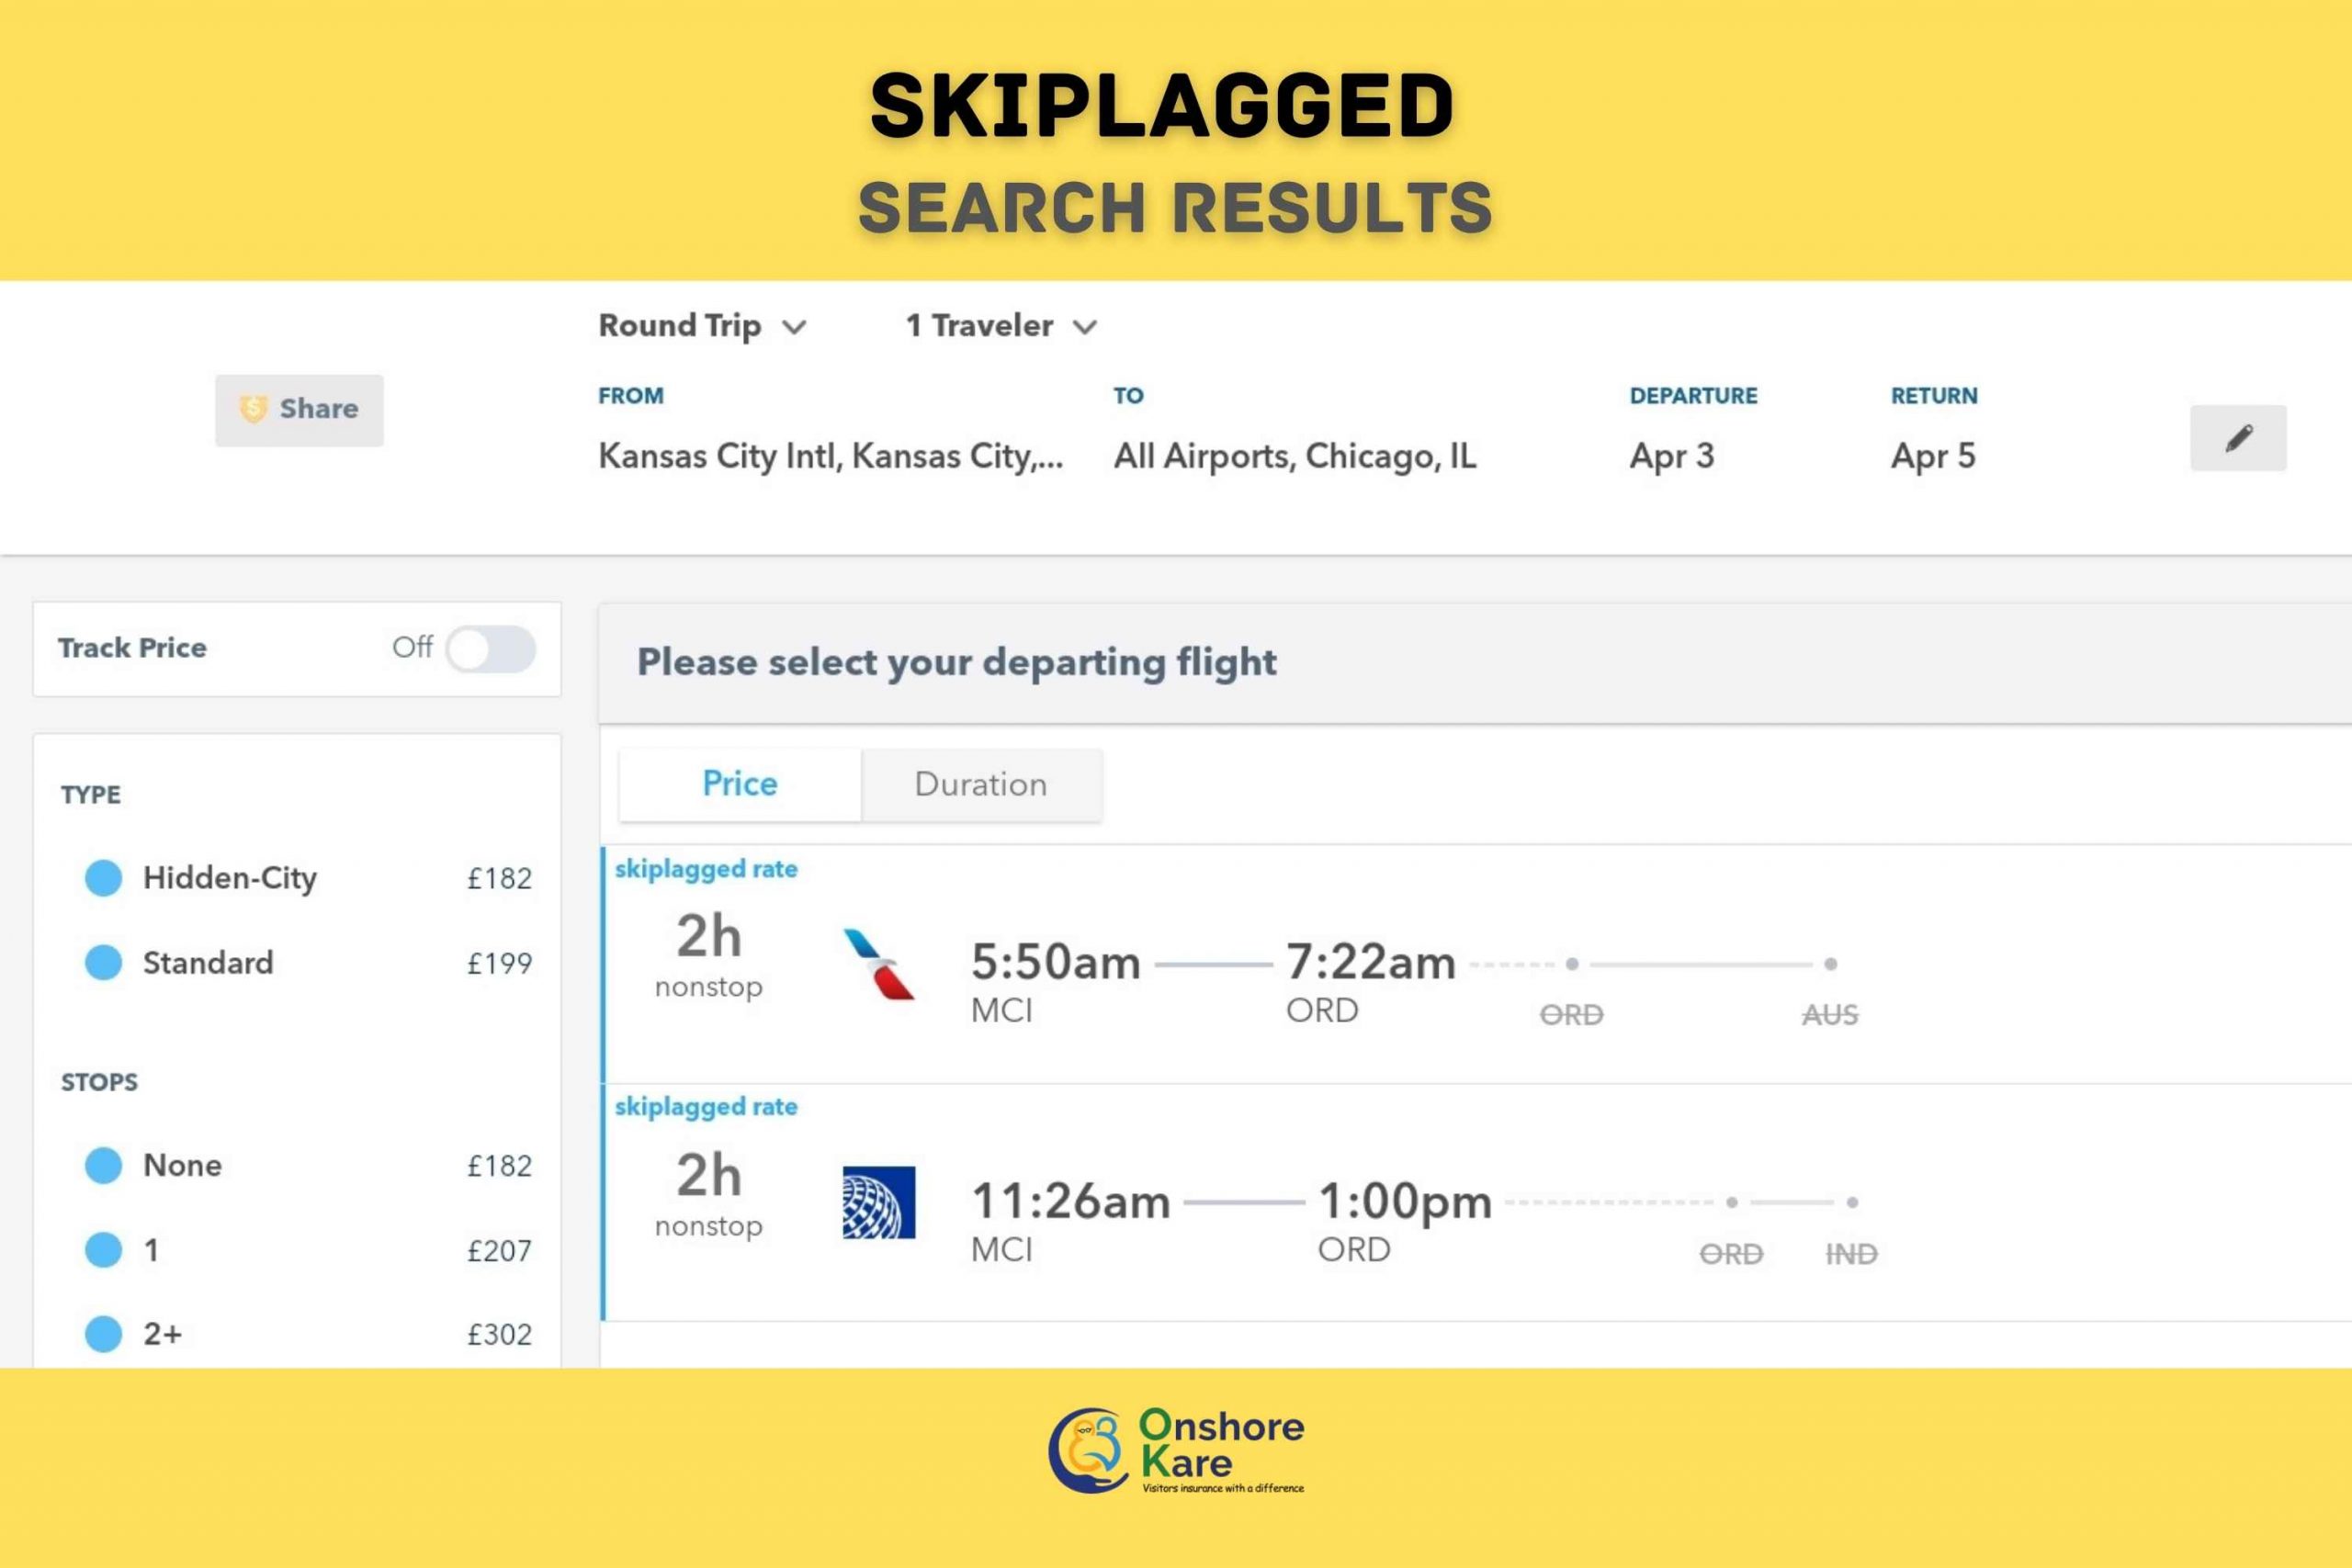 What is skiplagged and how does skiplagging work